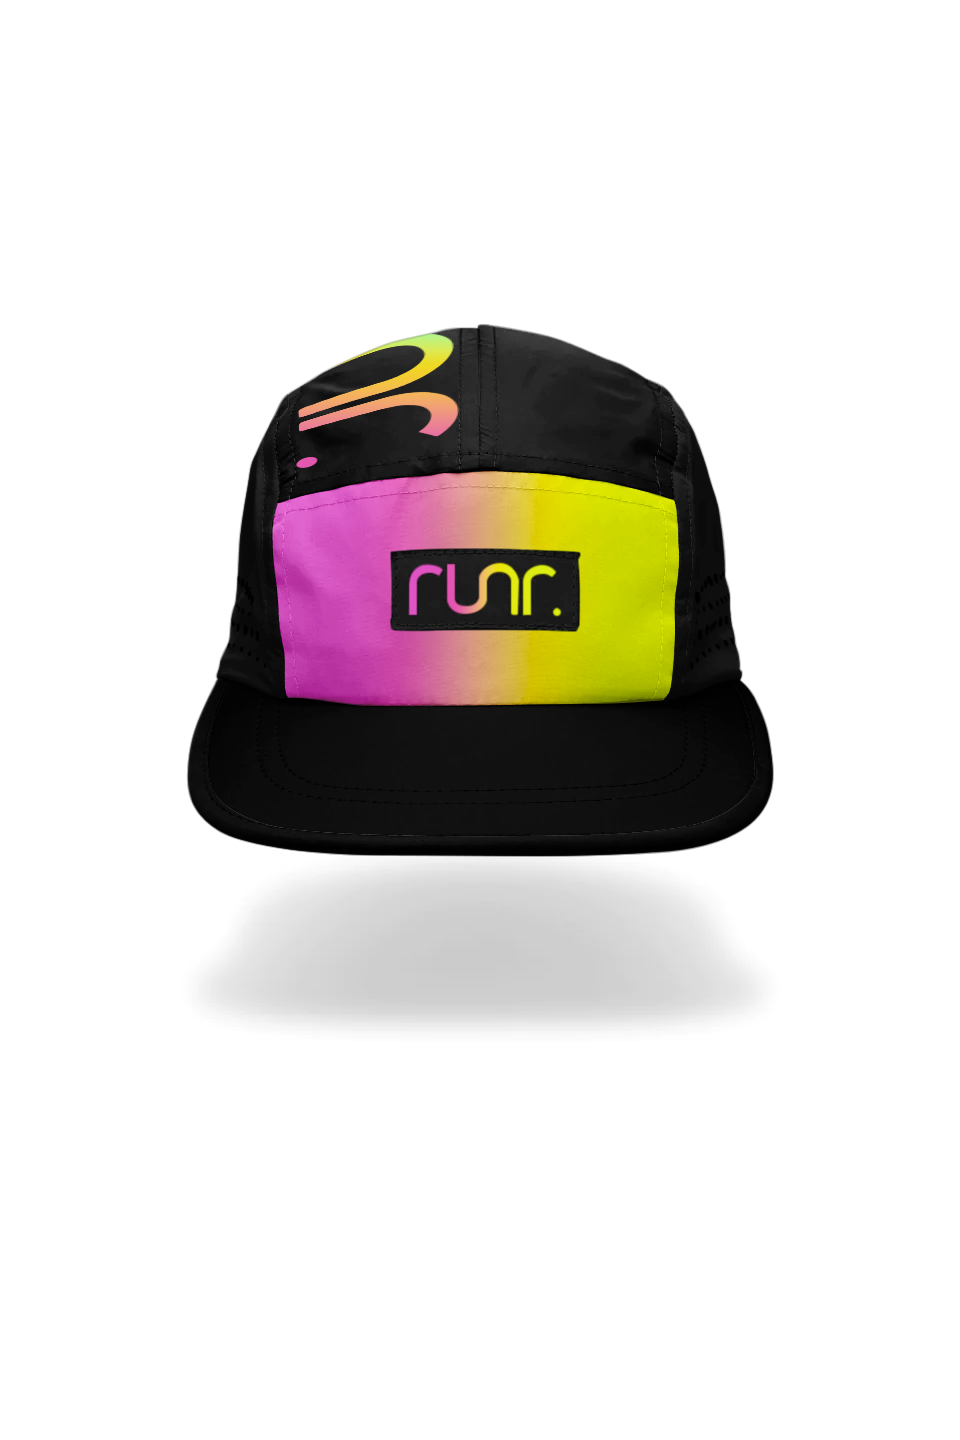 Runr New Mexico Technical Running Hat